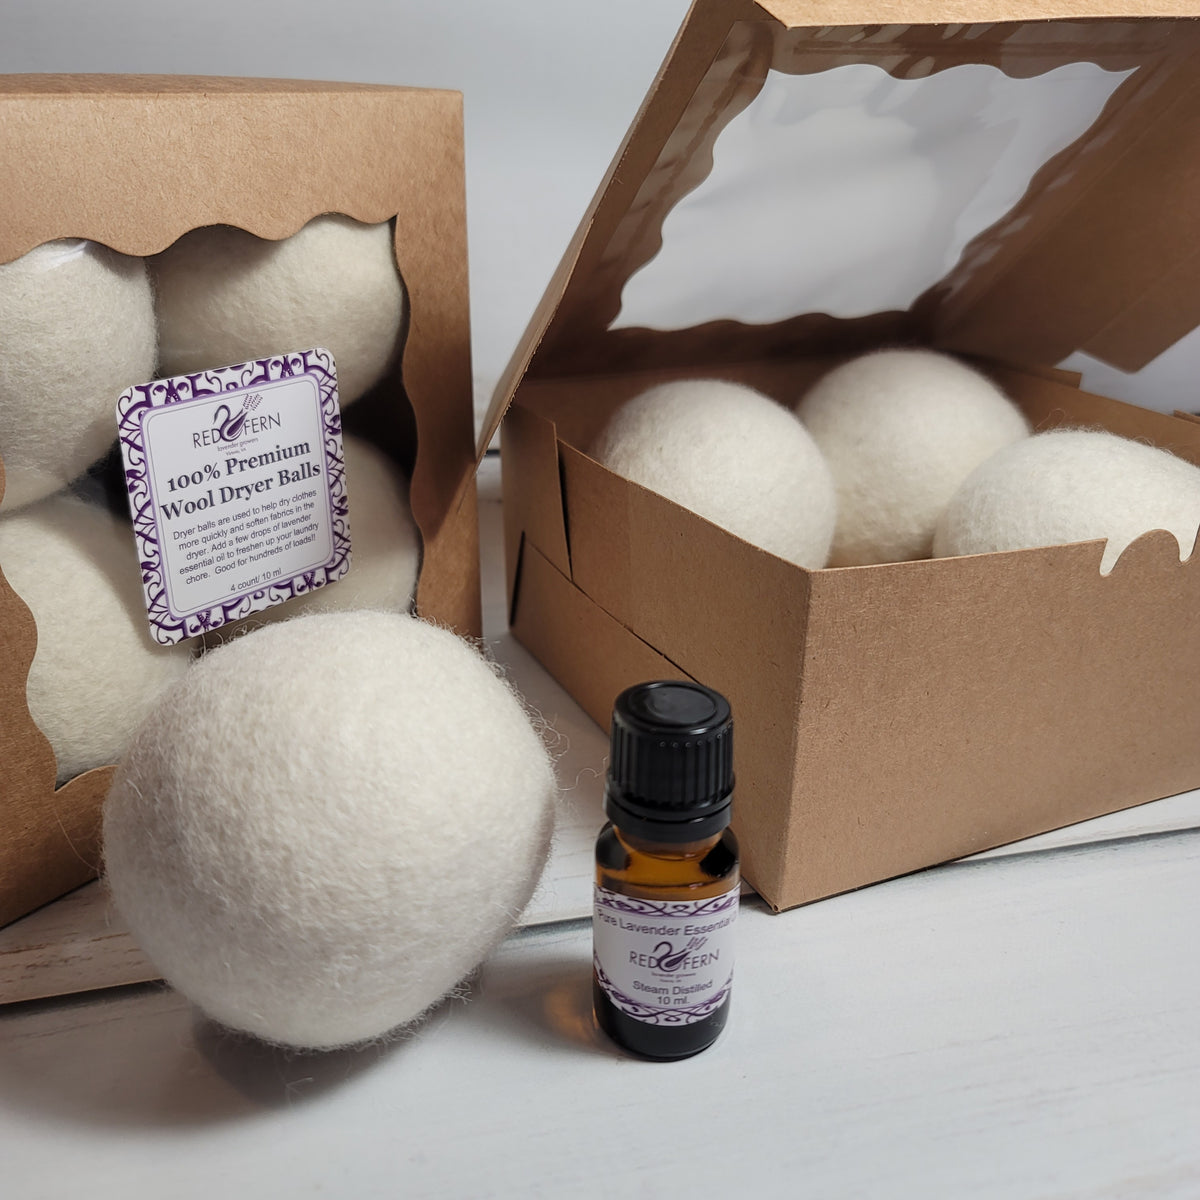 Will Essential Oils on Wool Dryer Balls Stain Clothes?